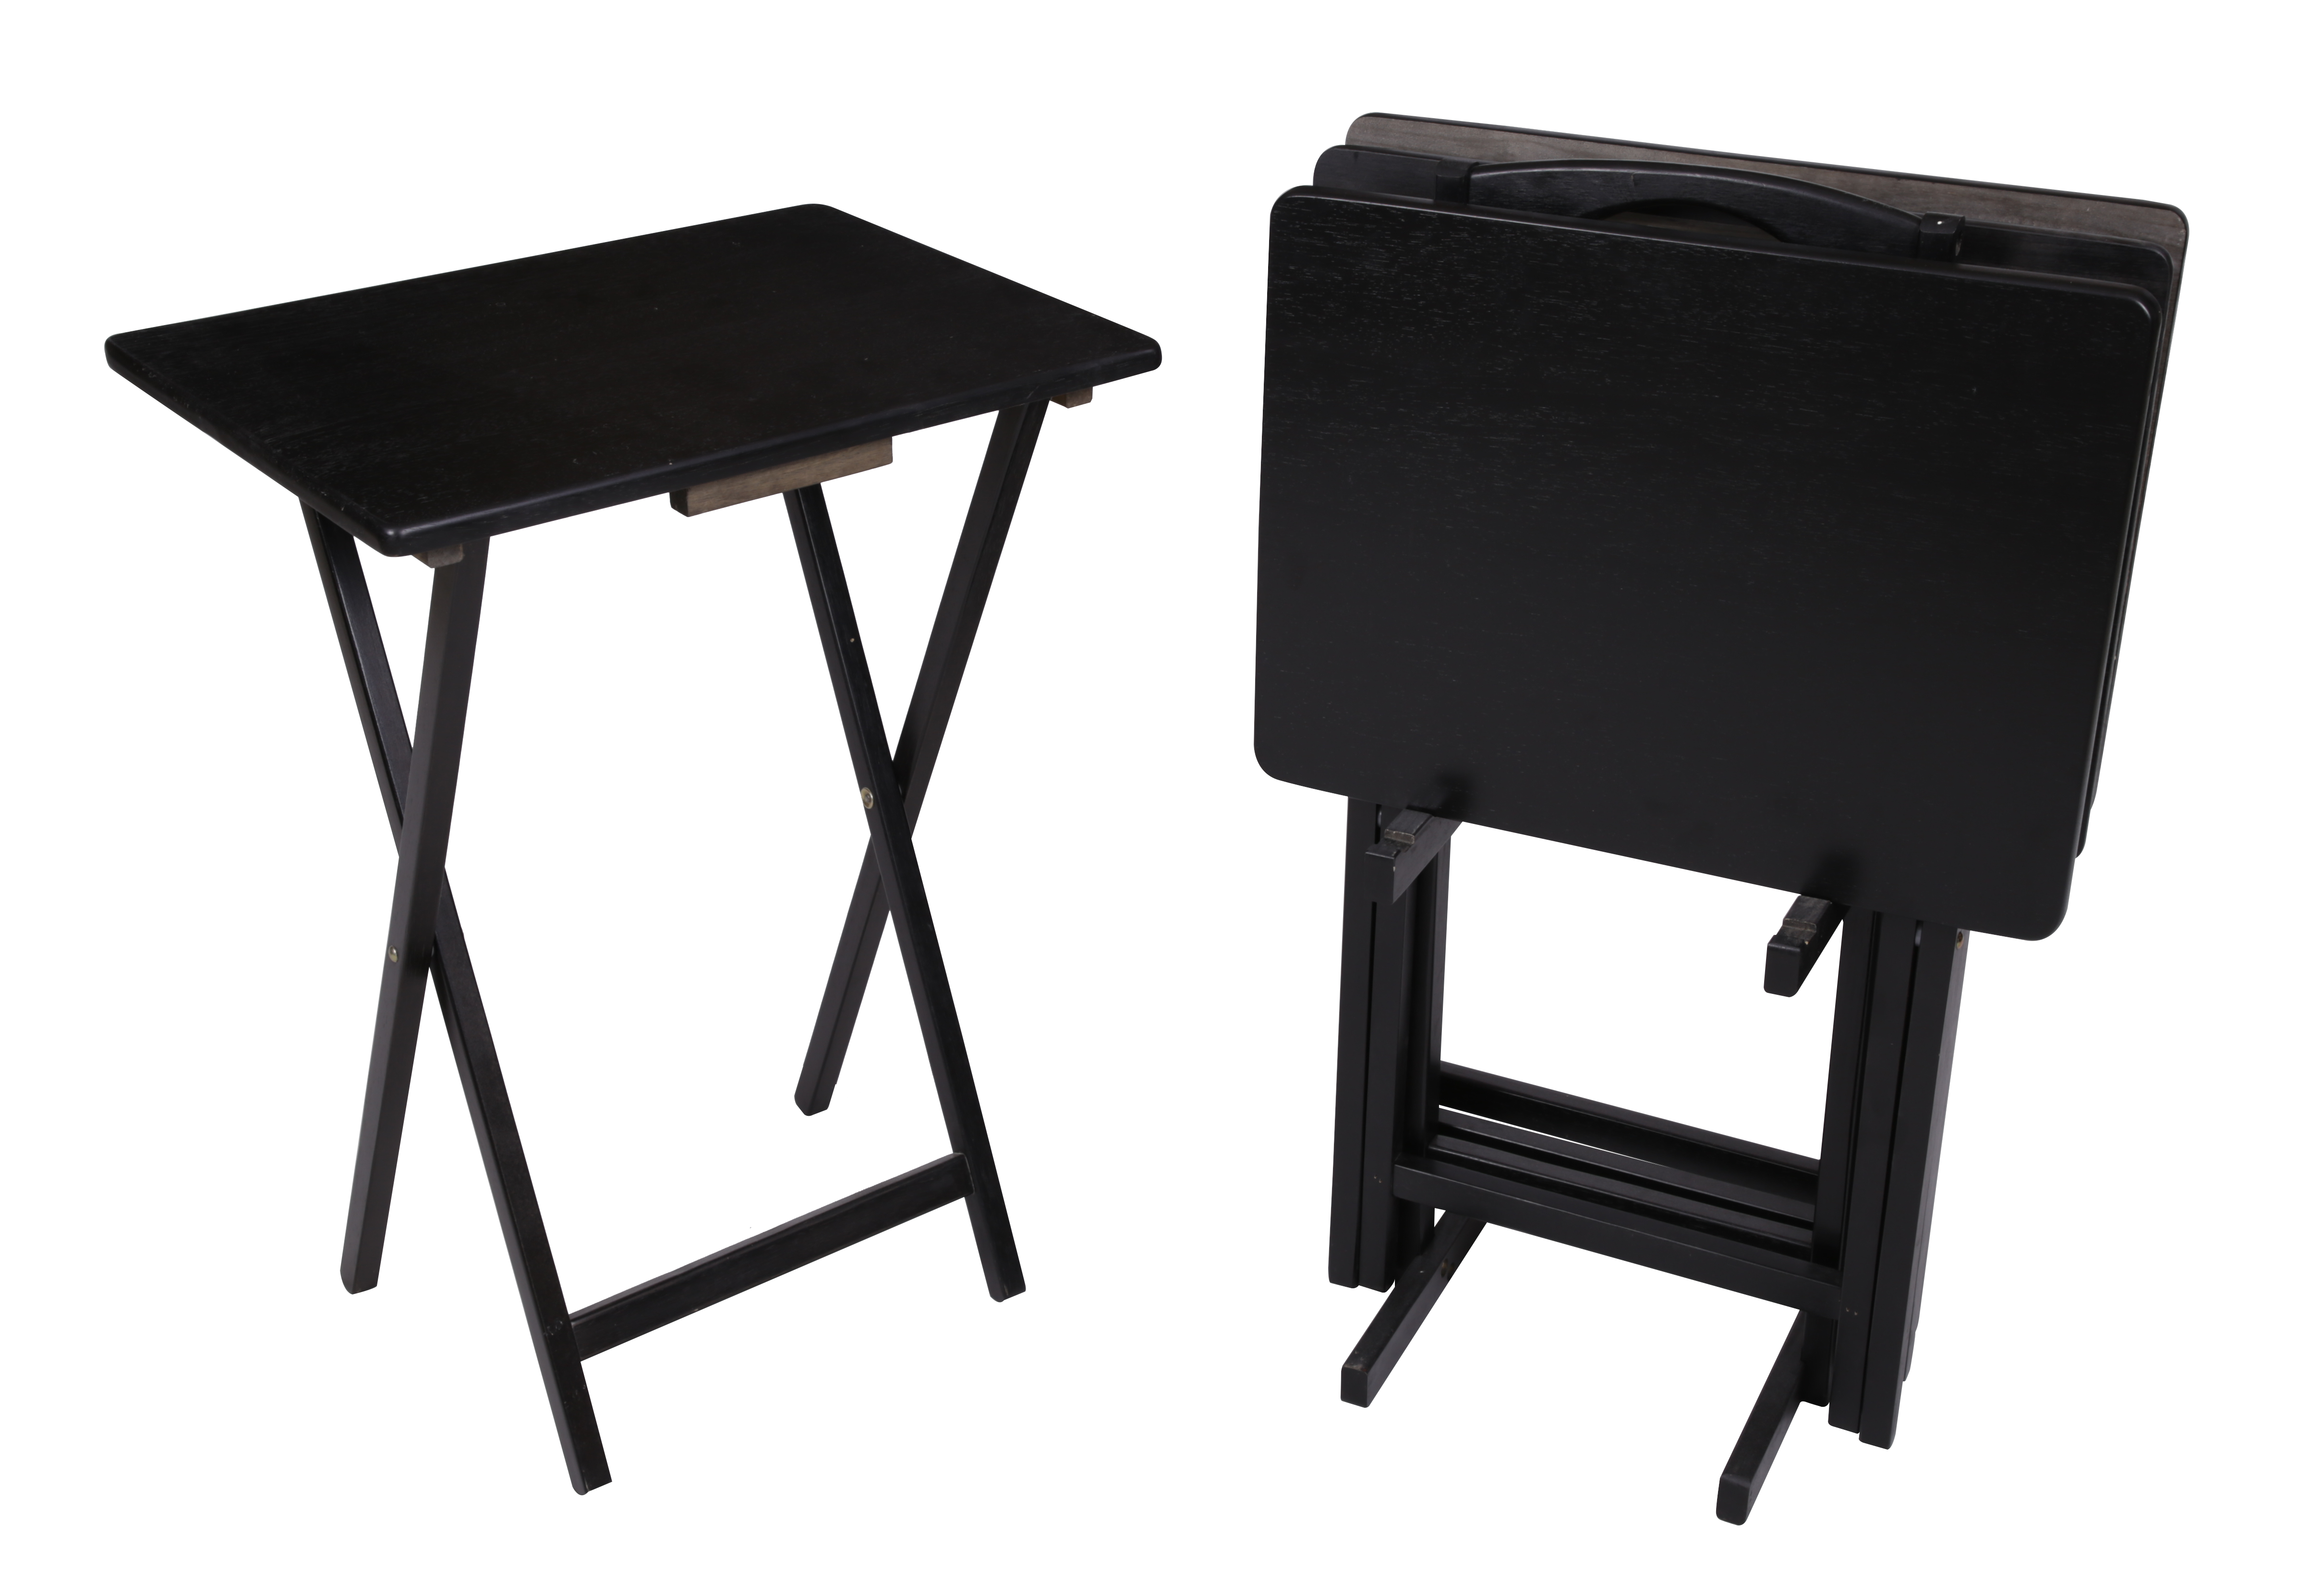 Mainstays Indoor Folding Table Set of 4 in Black  L19 x W15 x H26 inches.  4 Tables+1 Rack Stand. - image 1 of 7